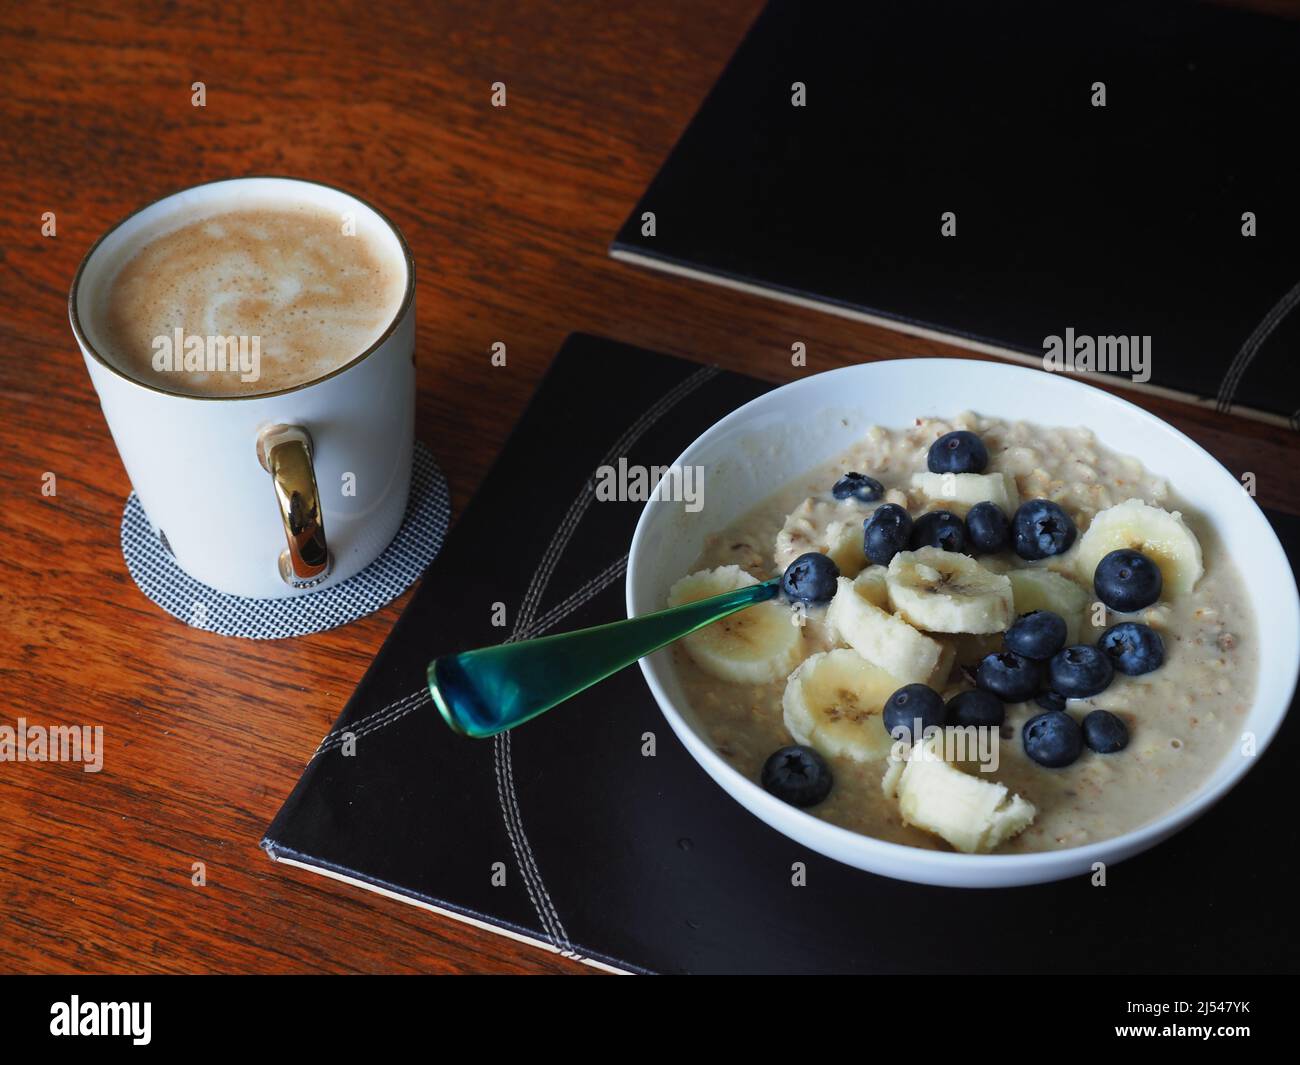 Close-up still life of a bowl of porridge with blueberries and bananas and a mug of coffee Stock Photo